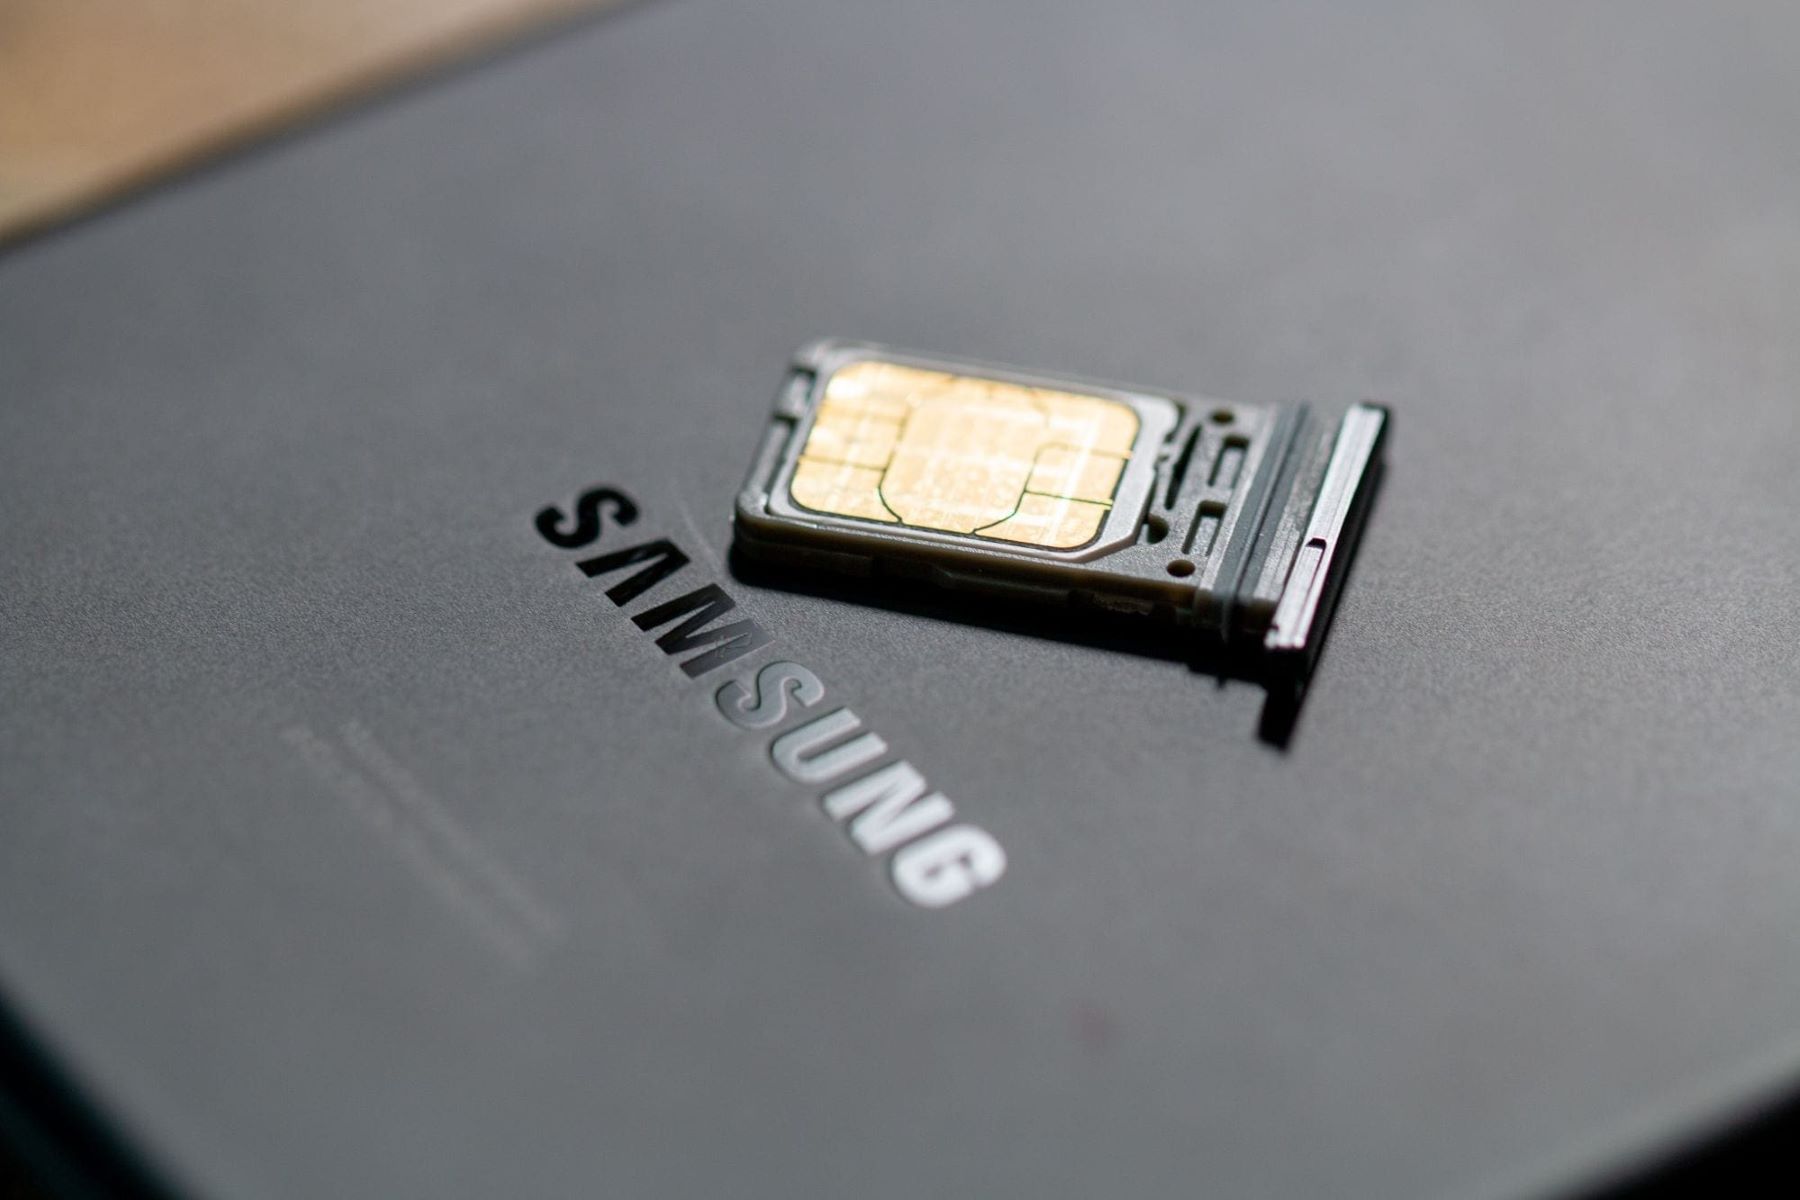 removing-the-sim-card-from-samsung-step-by-step-guide